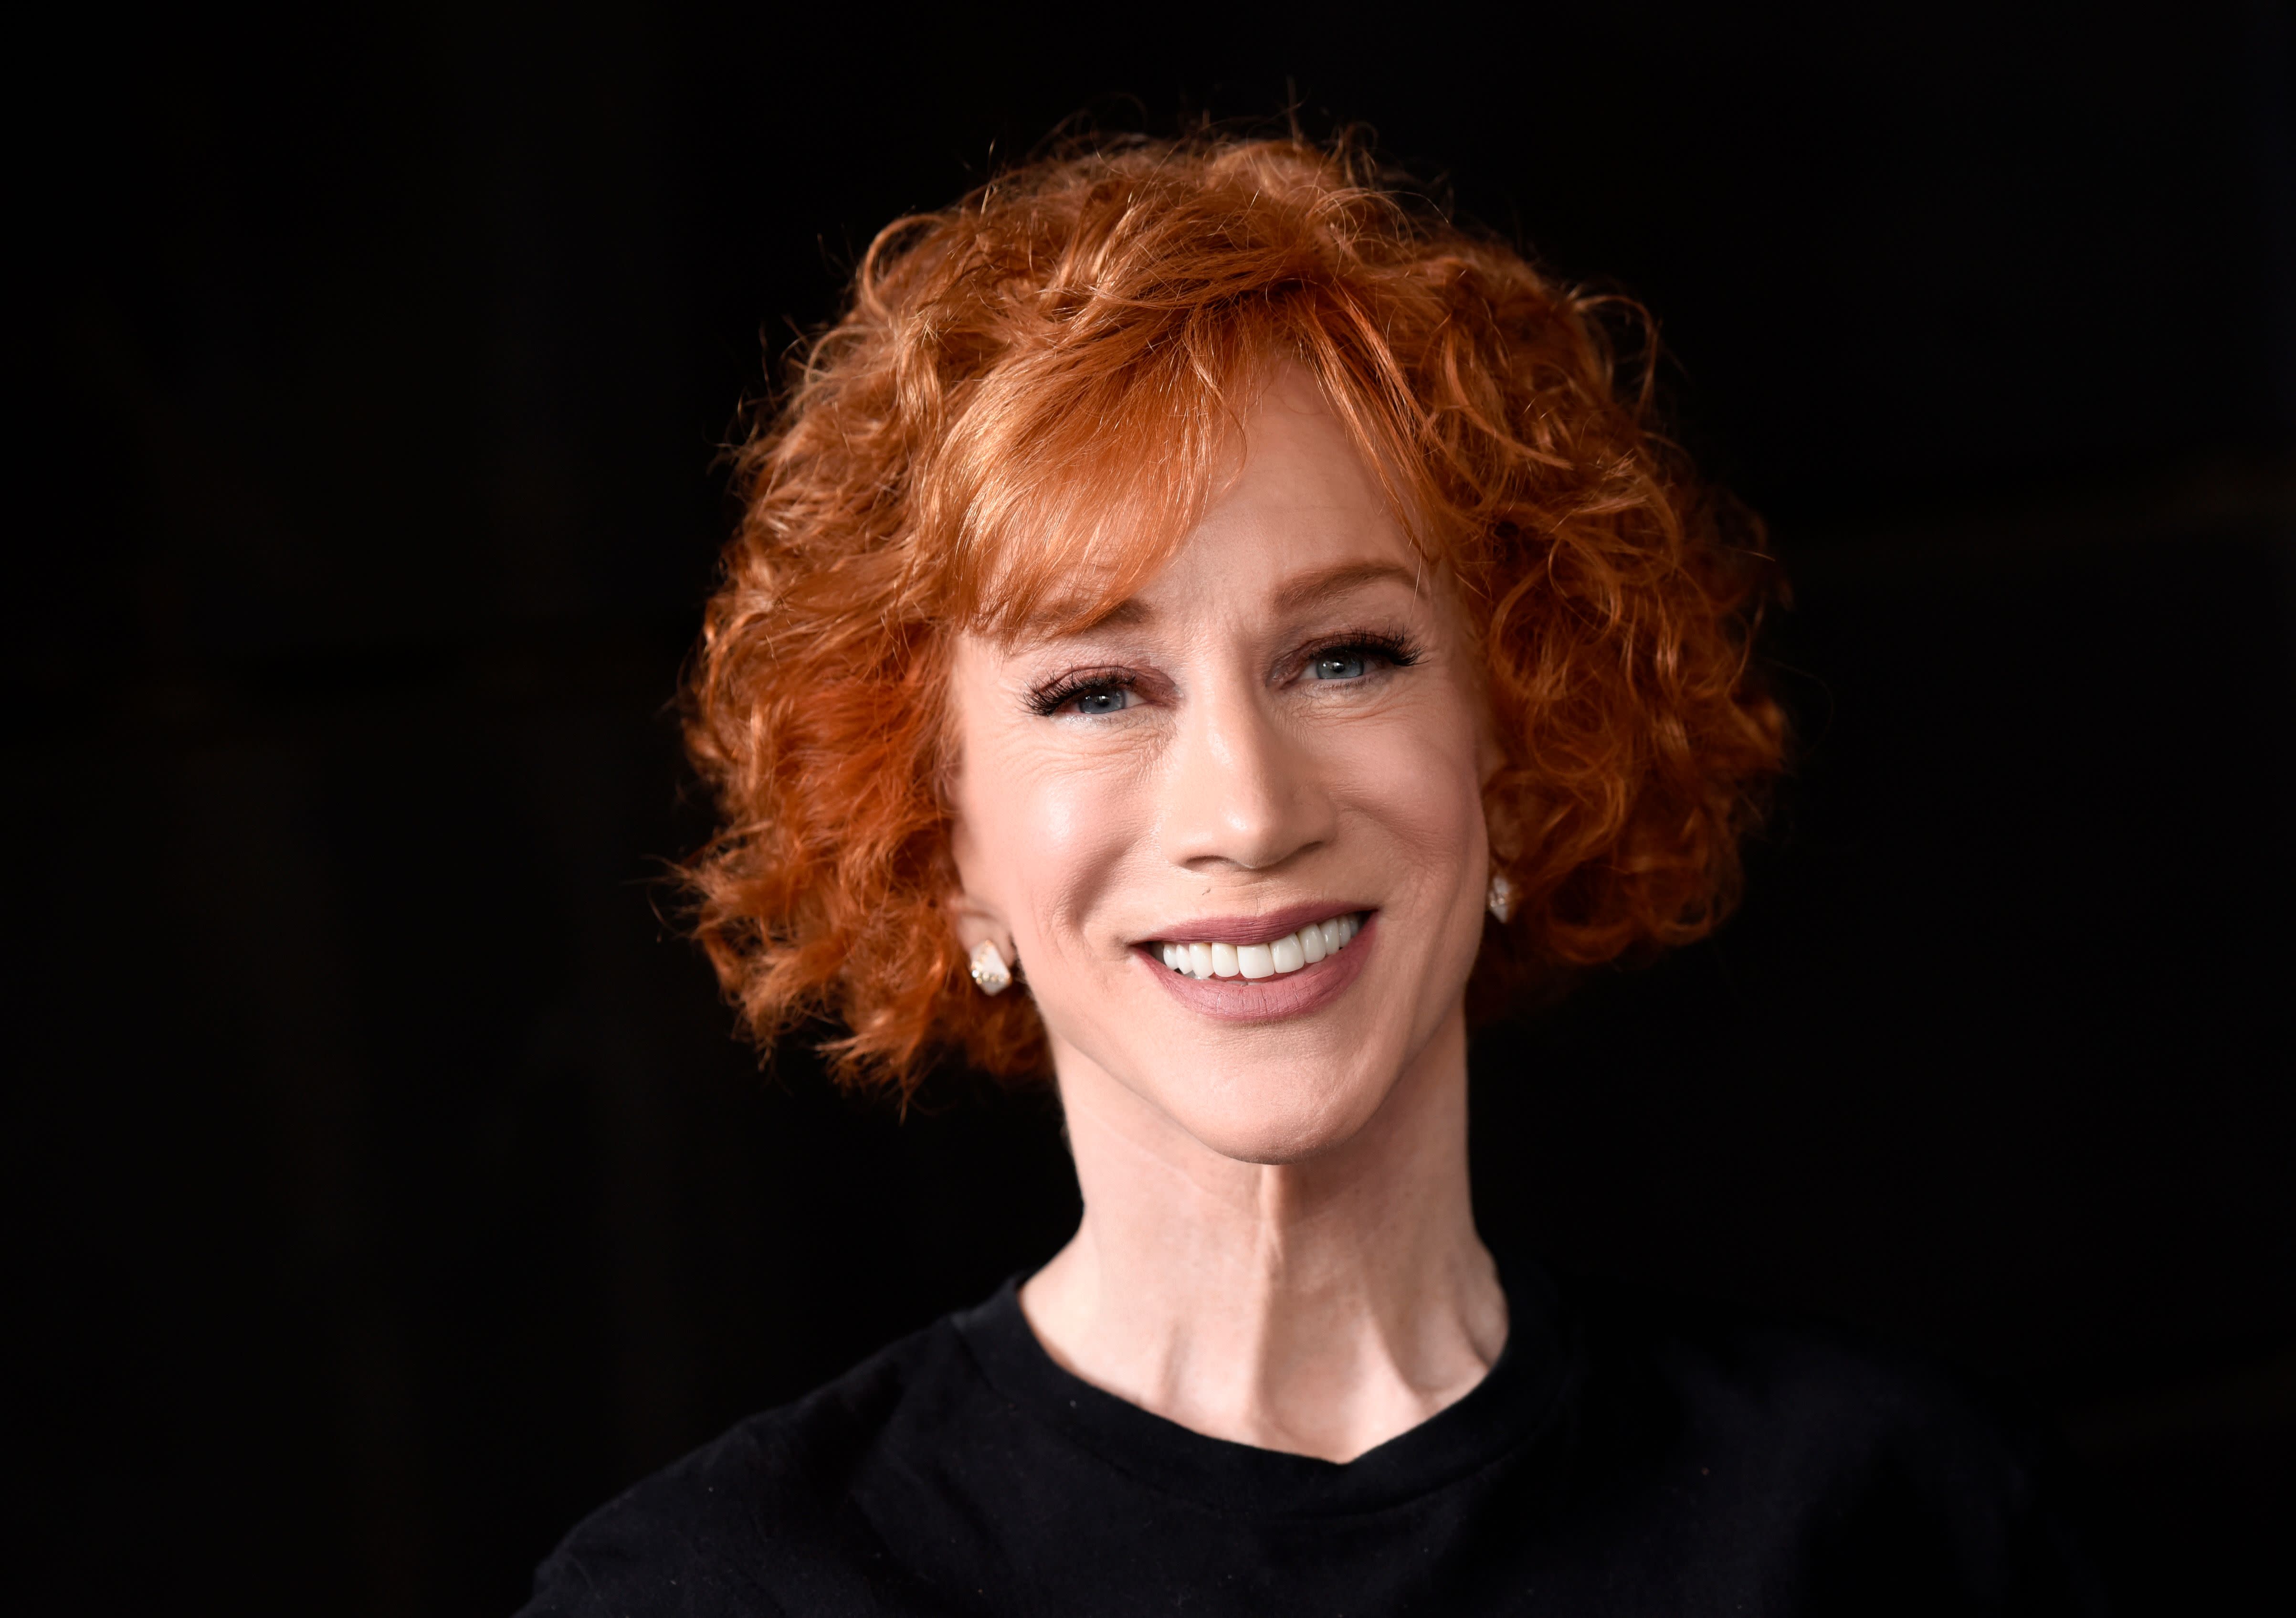 Disgraced Comedian Kathy Griffin Reacts to President Donald Trump's